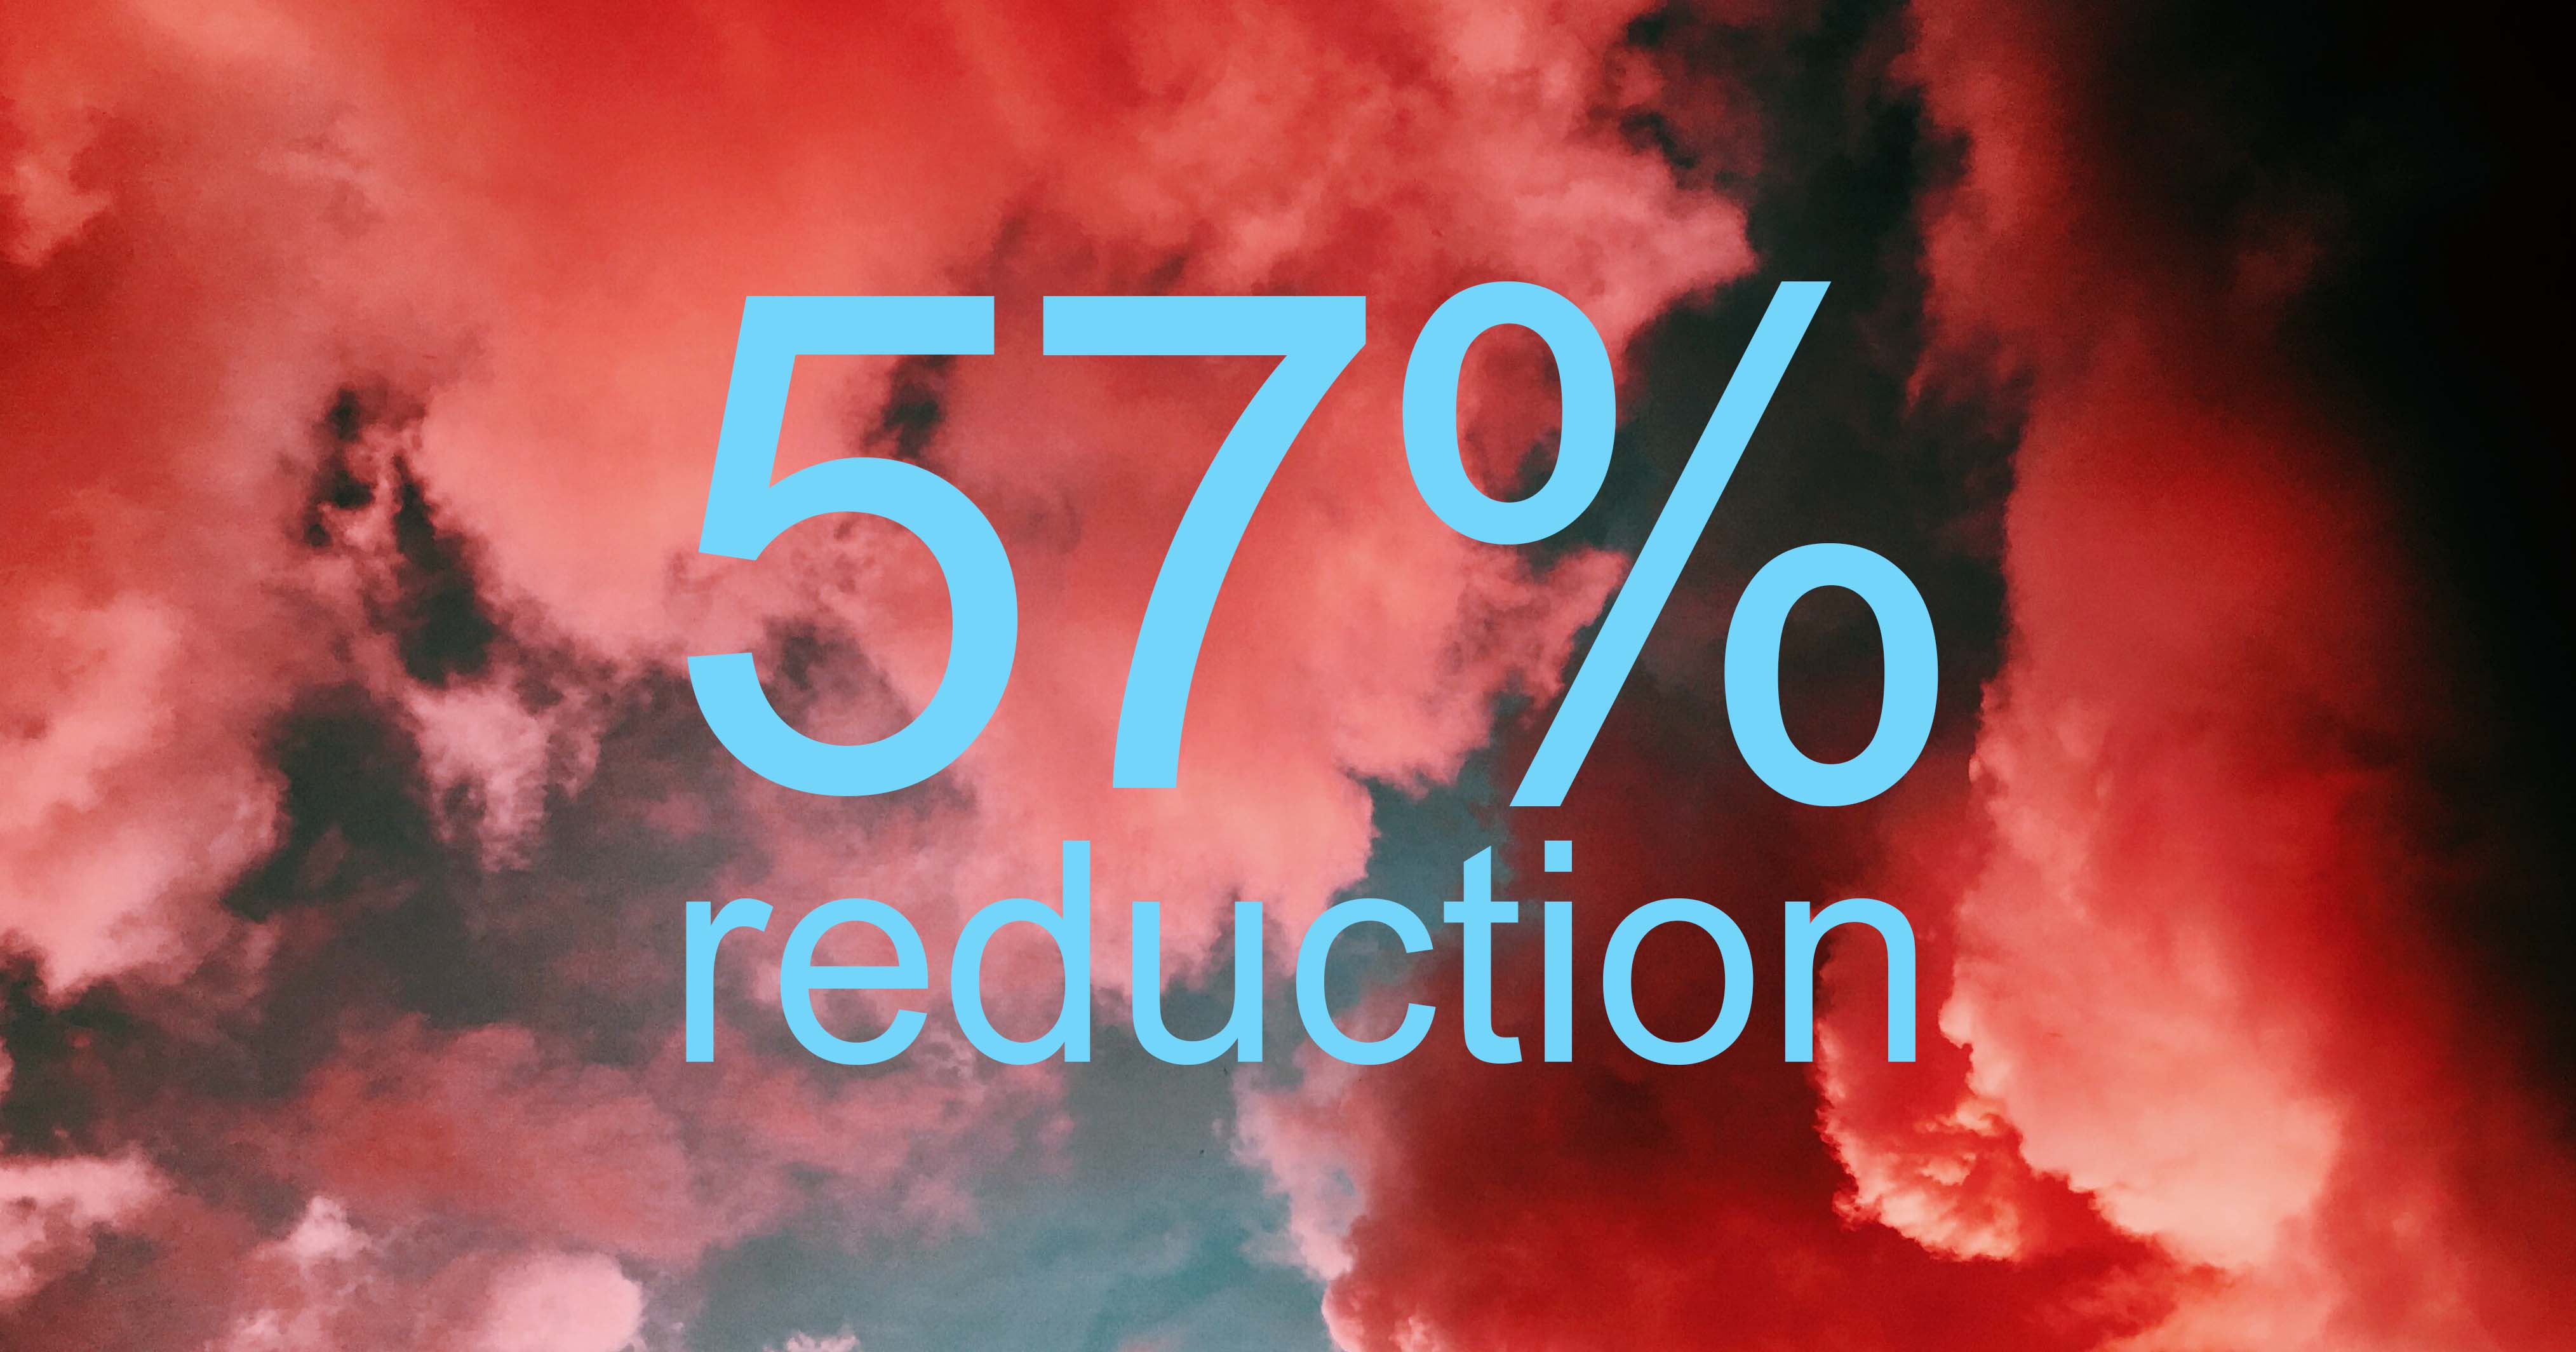 Text showing 57 percent reduction.